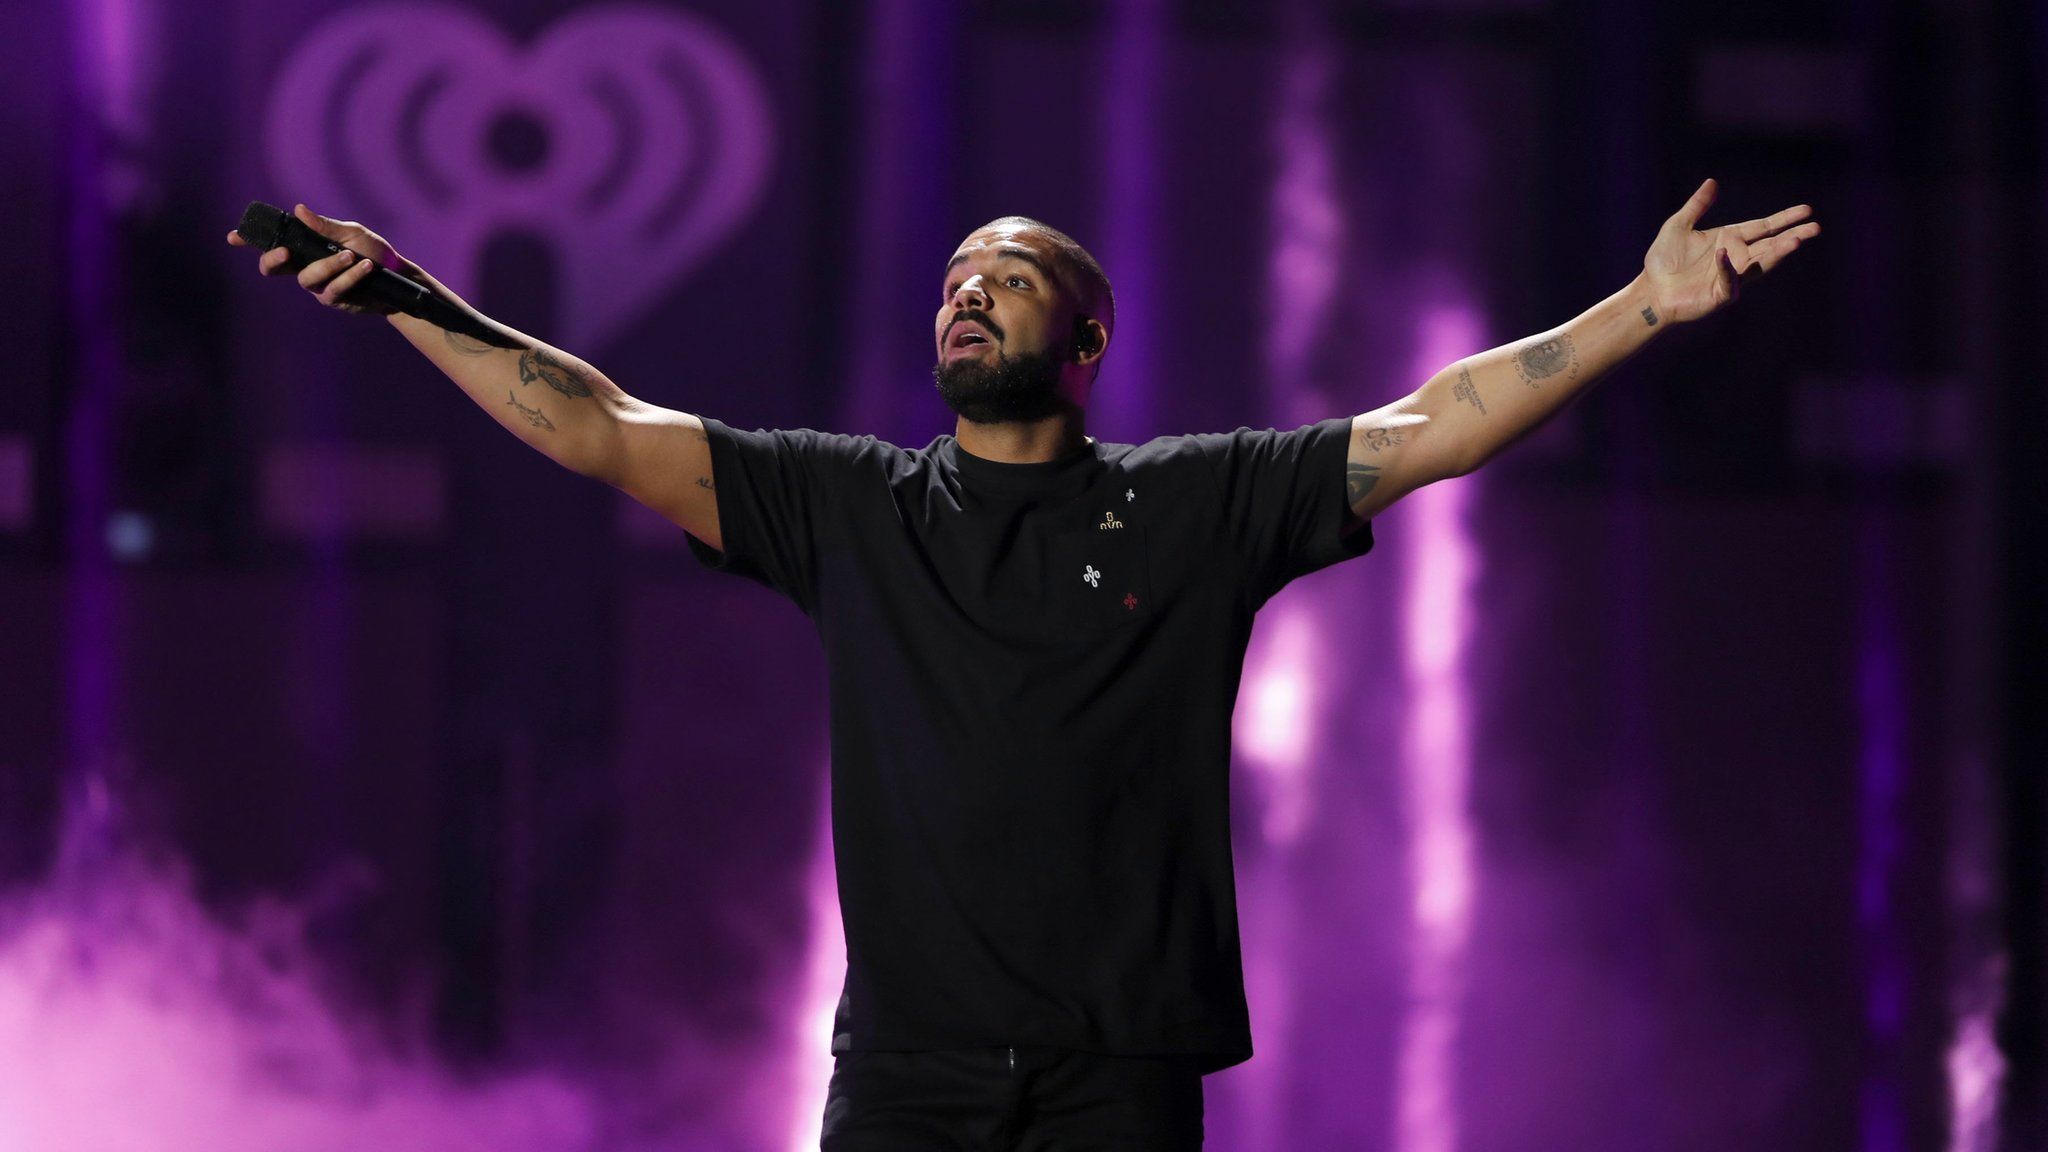 Rapper Drake performs onstage at the 2016 iHeartRadio Music Festival at T-Mobile Arena on September 23, 2016 in Las Vegas, Nevada.